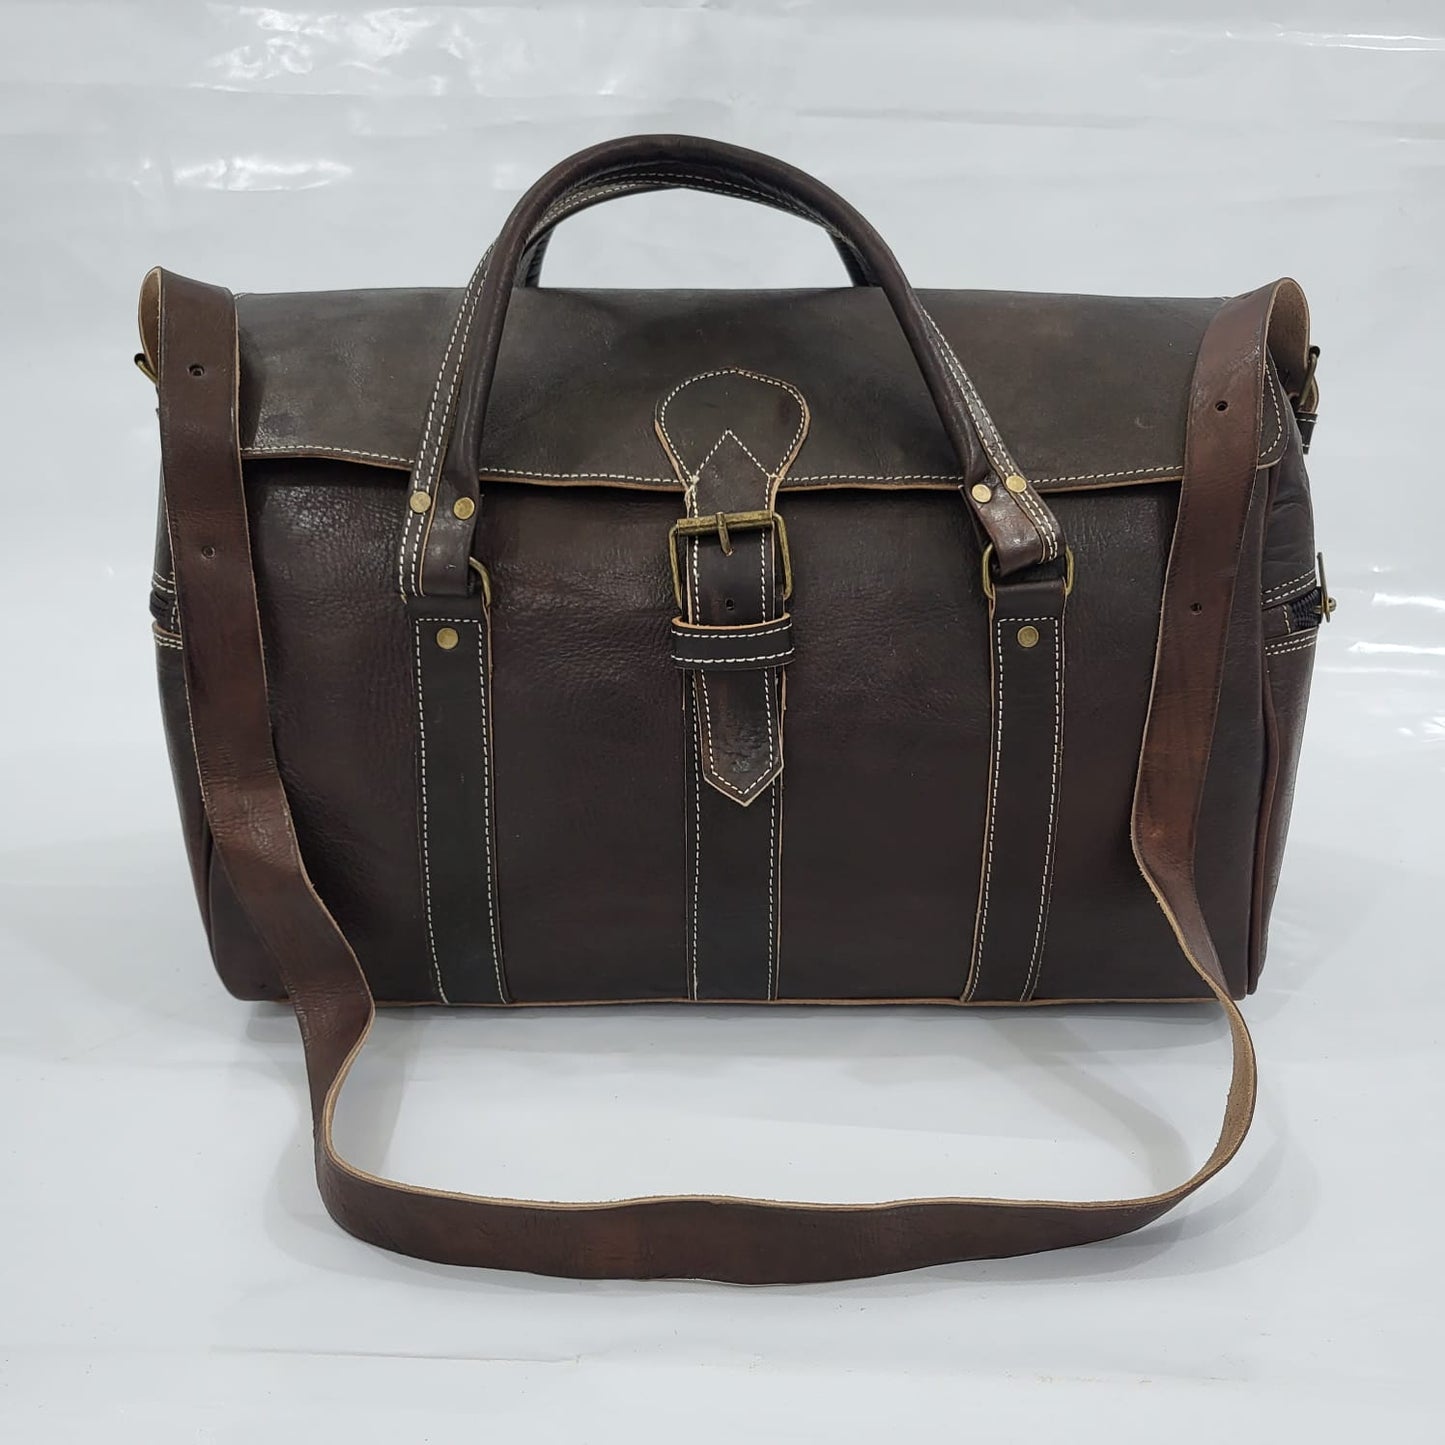 Explore Our Handmade Moroccan Leather Travel Bag for Discerning Men